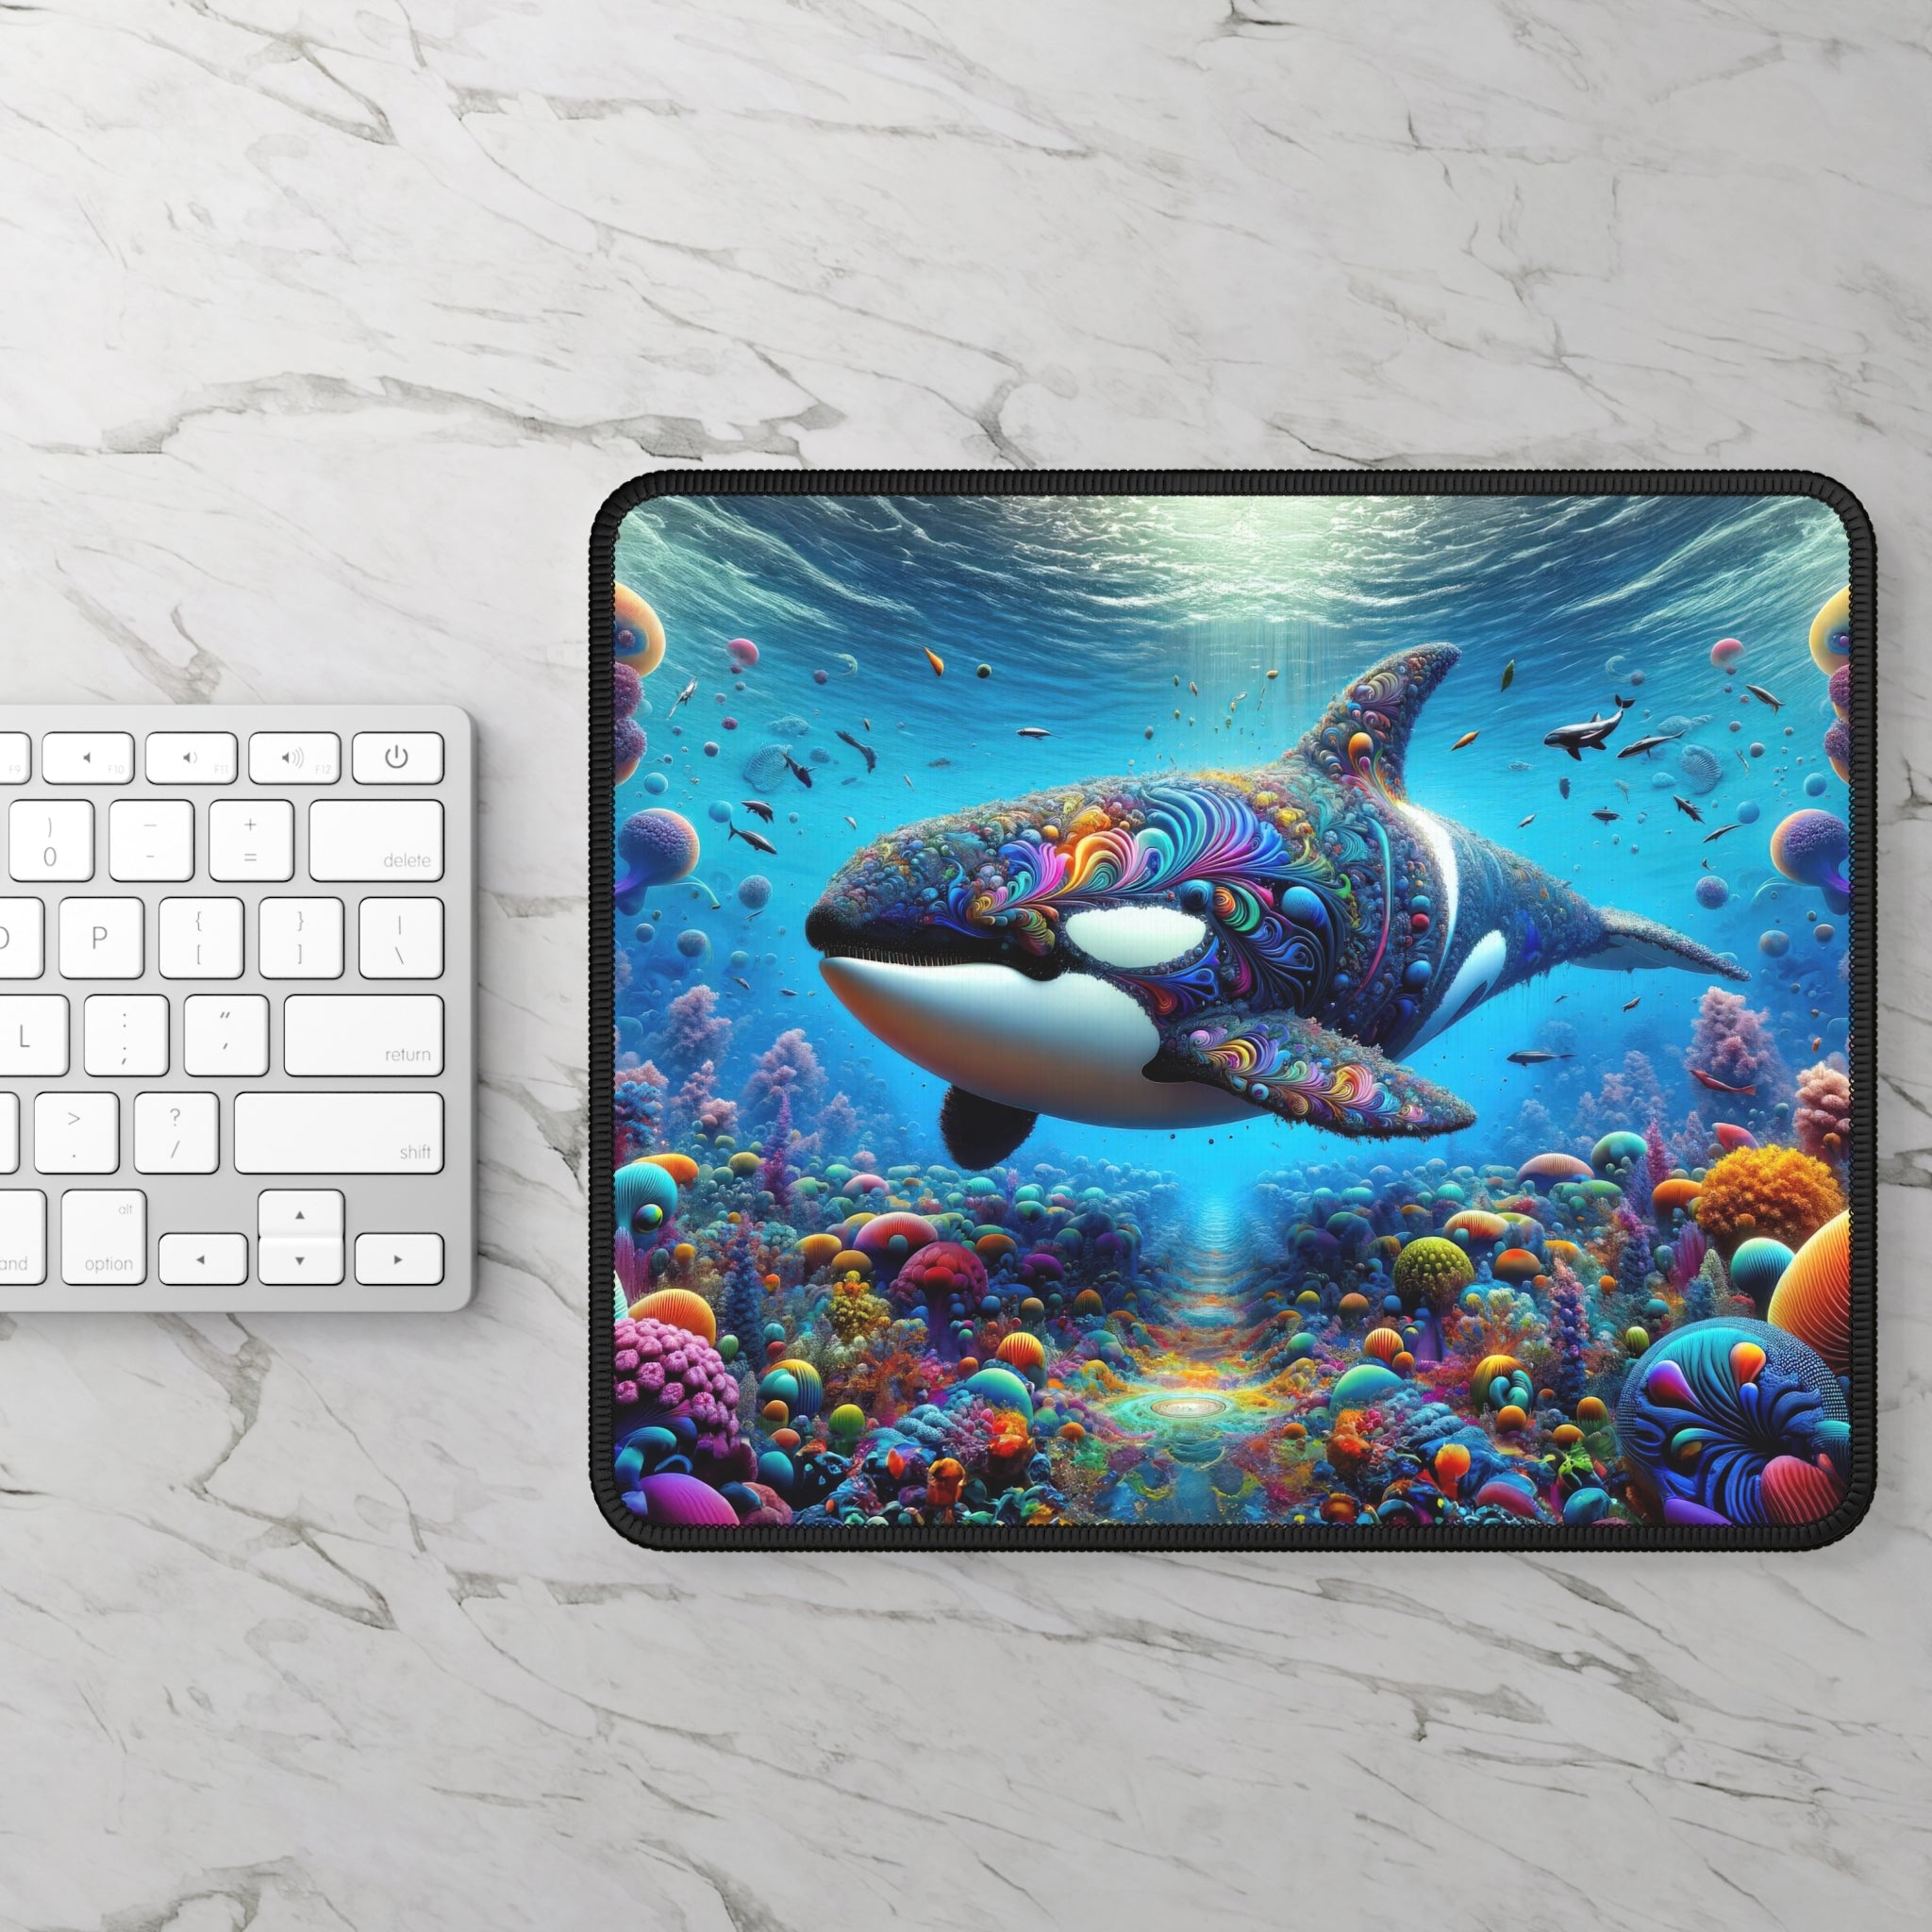 Orca Odyssey in the Coral Cosmos Gaming Mouse Pad